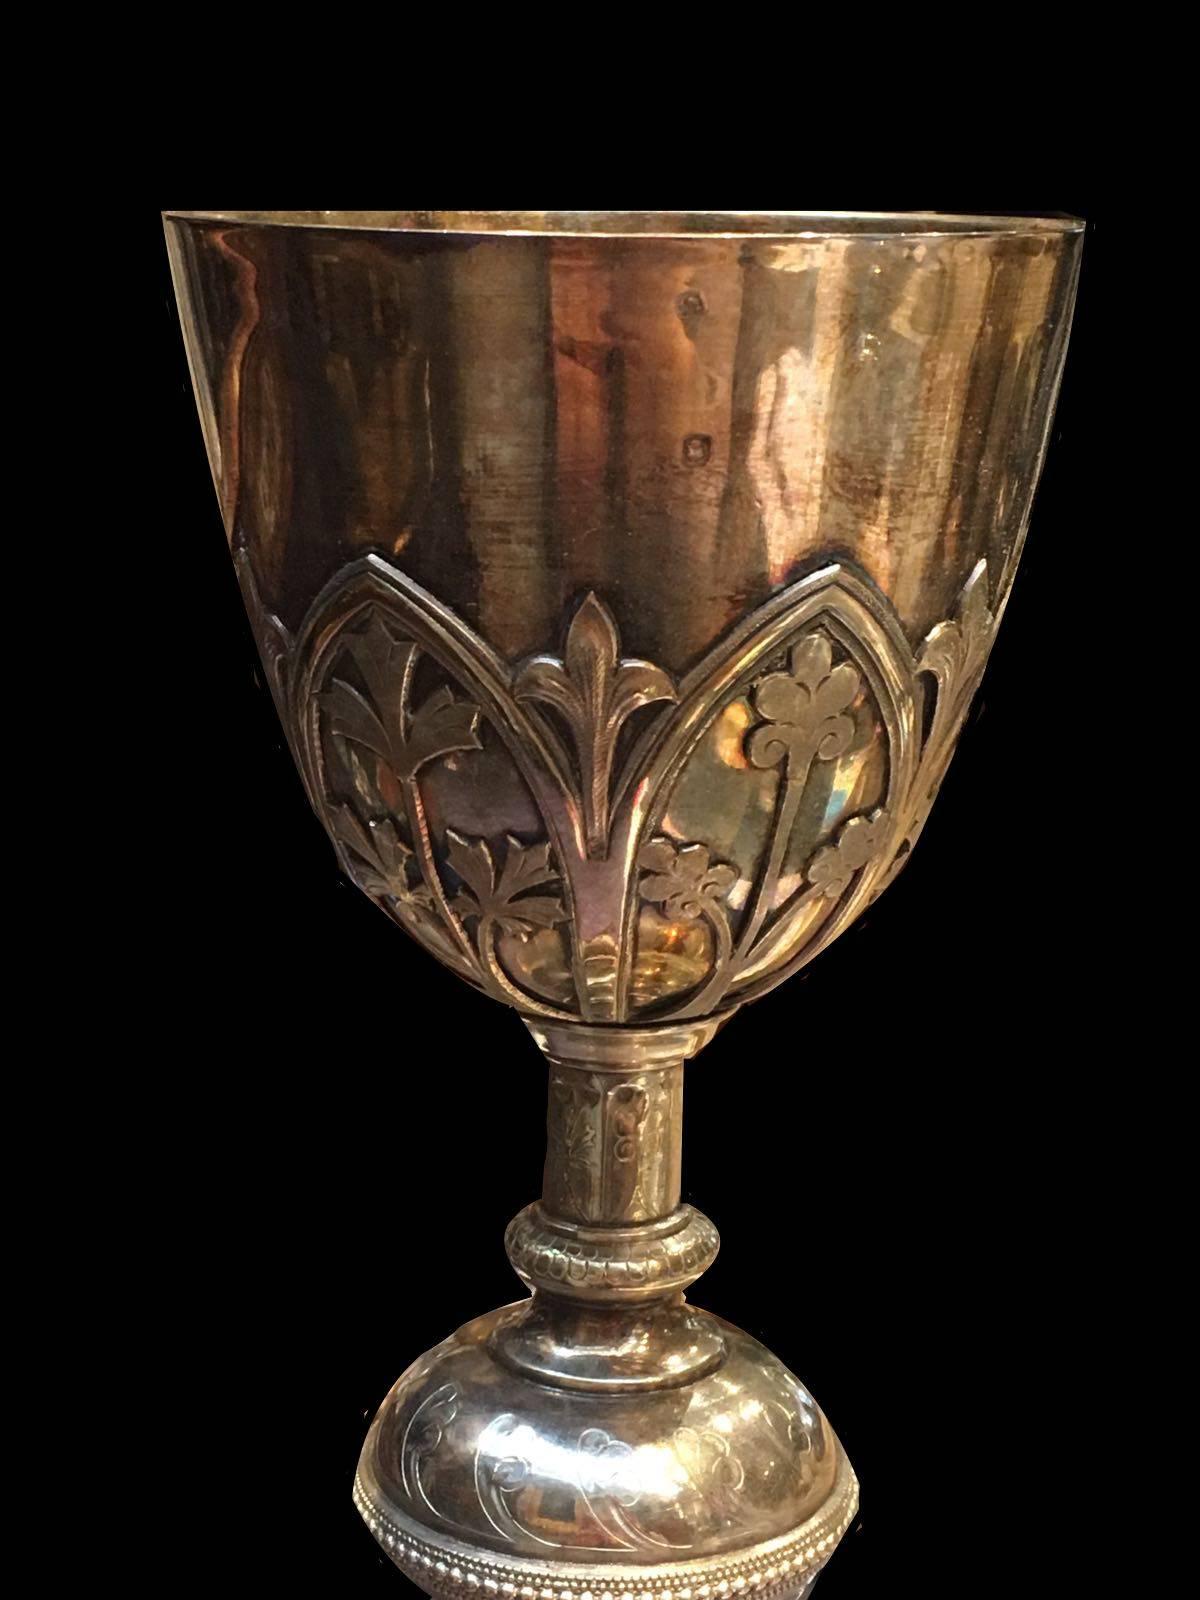 19th century, continental silver gilt chalice, decorated with arcading and letters.